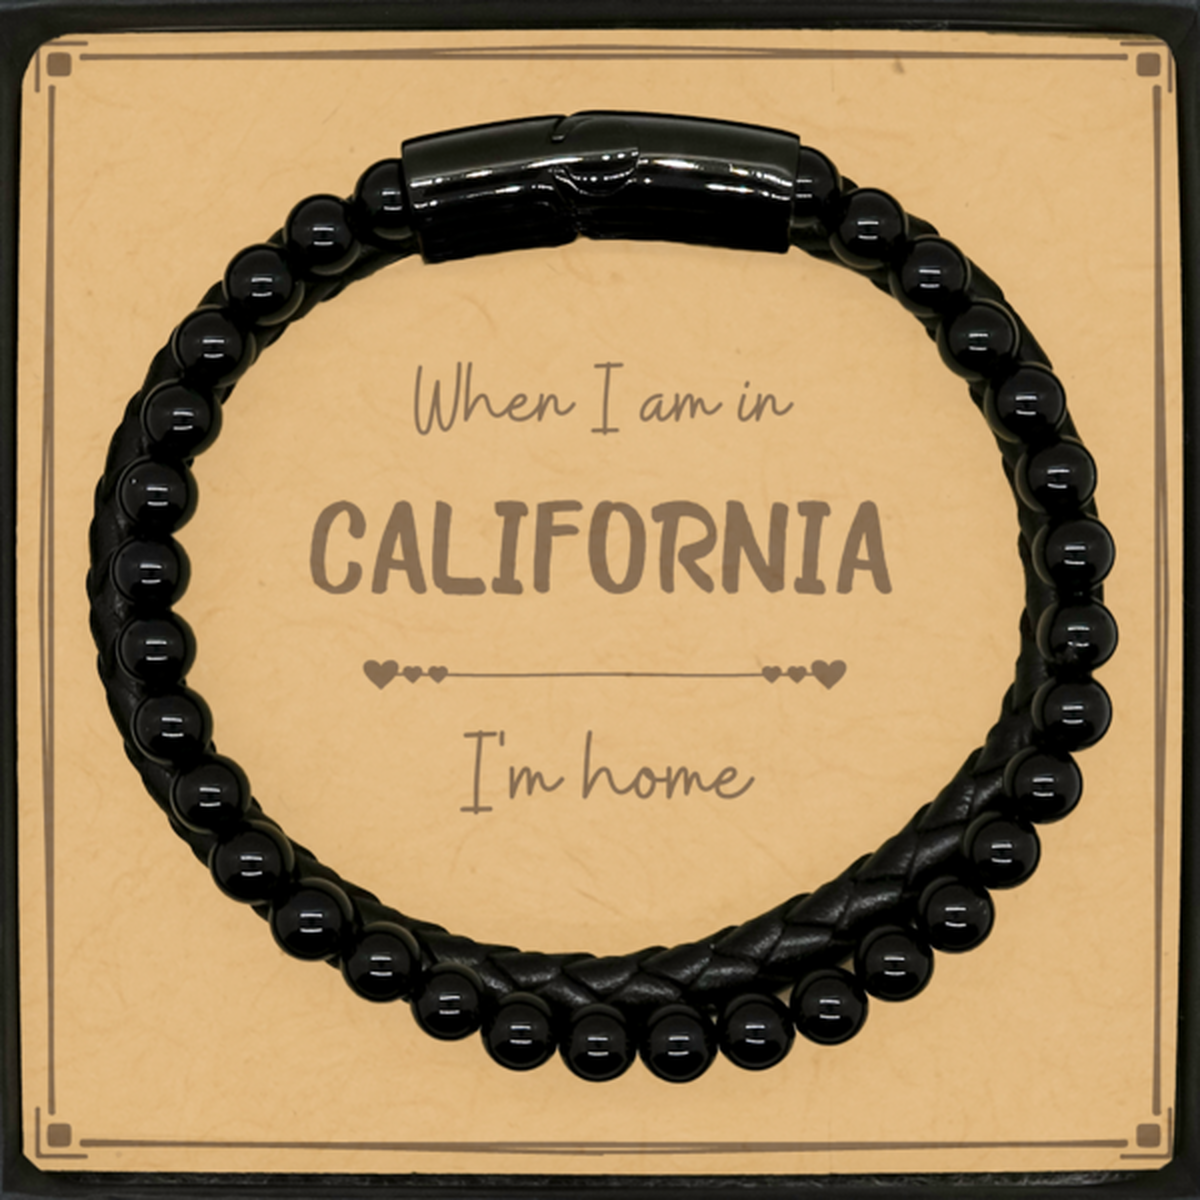 When I am in California I'm home Stone Leather Bracelets, Message Card Gifts For California, State California Birthday Gifts for Friends Coworker